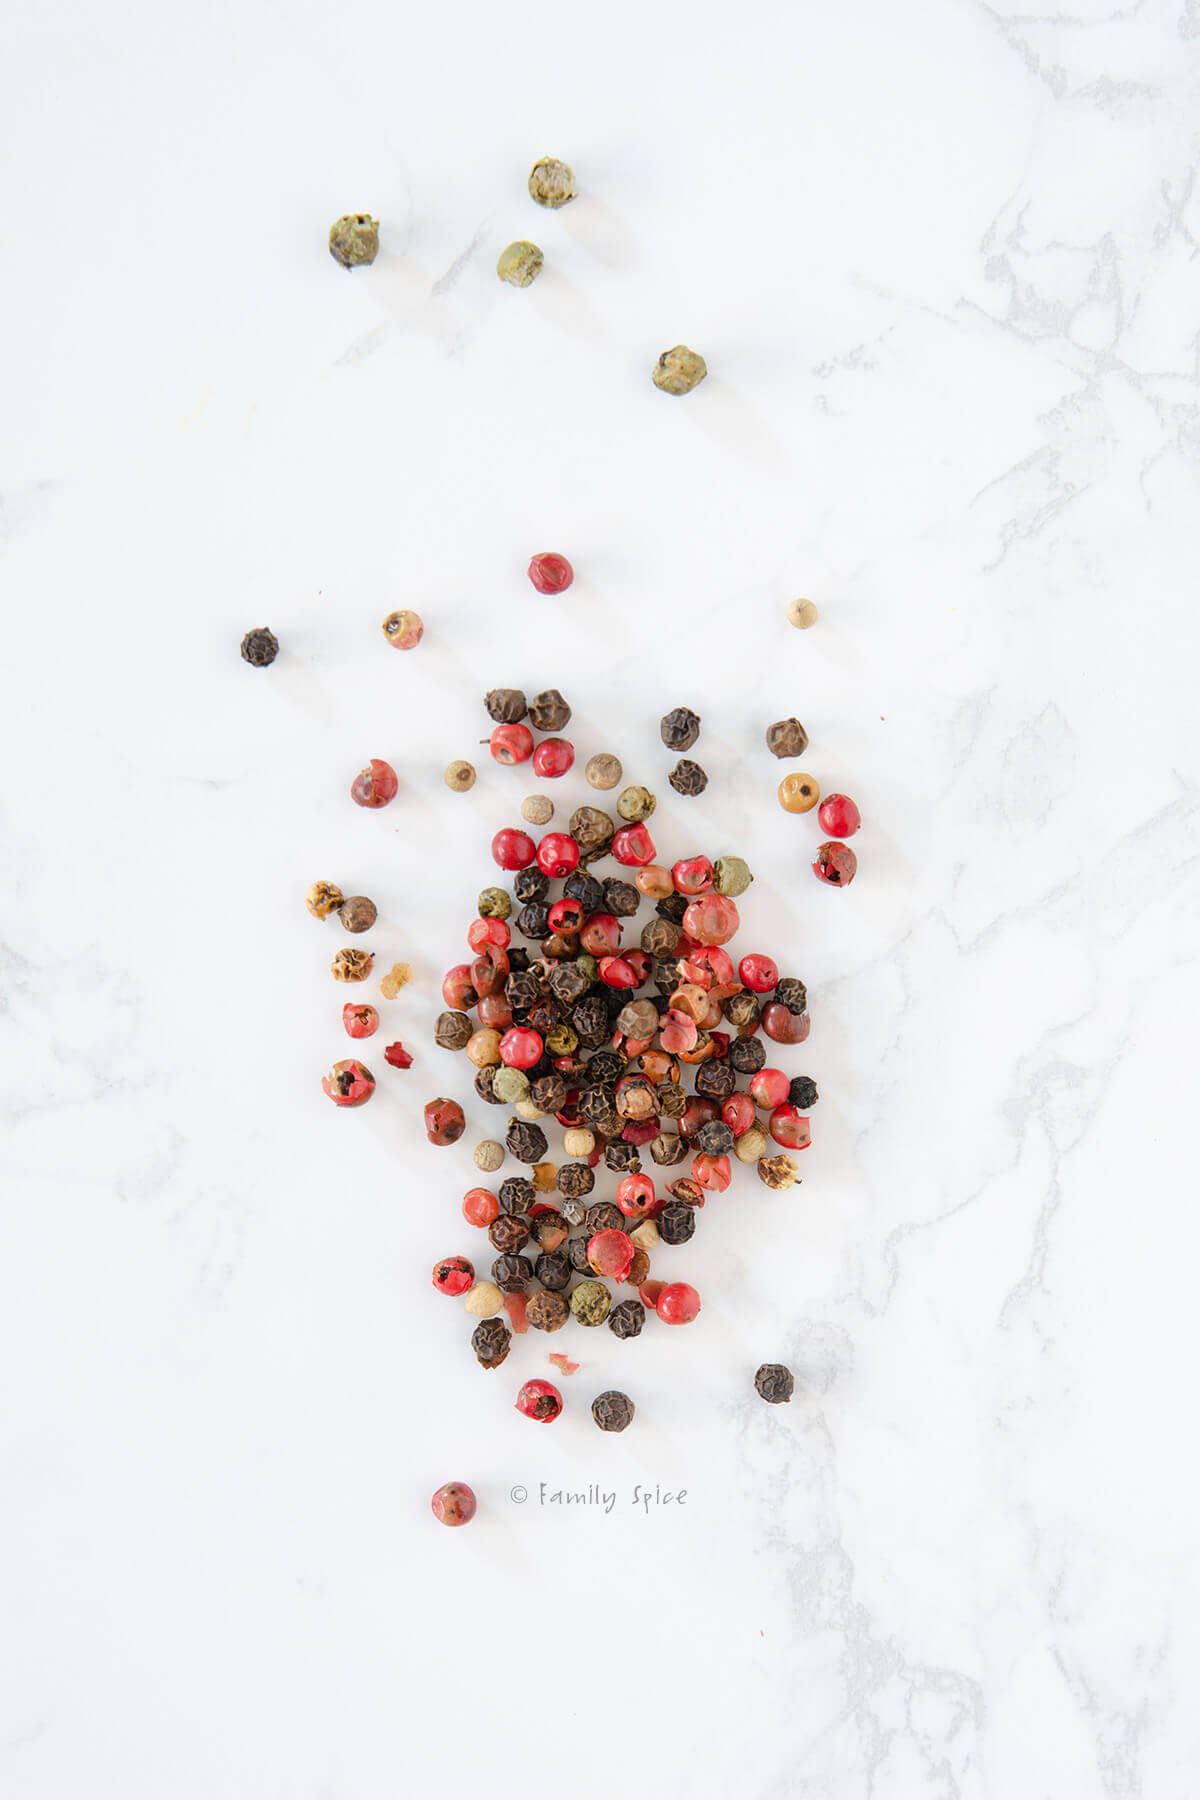 Assorted peppercorns on a white marble background